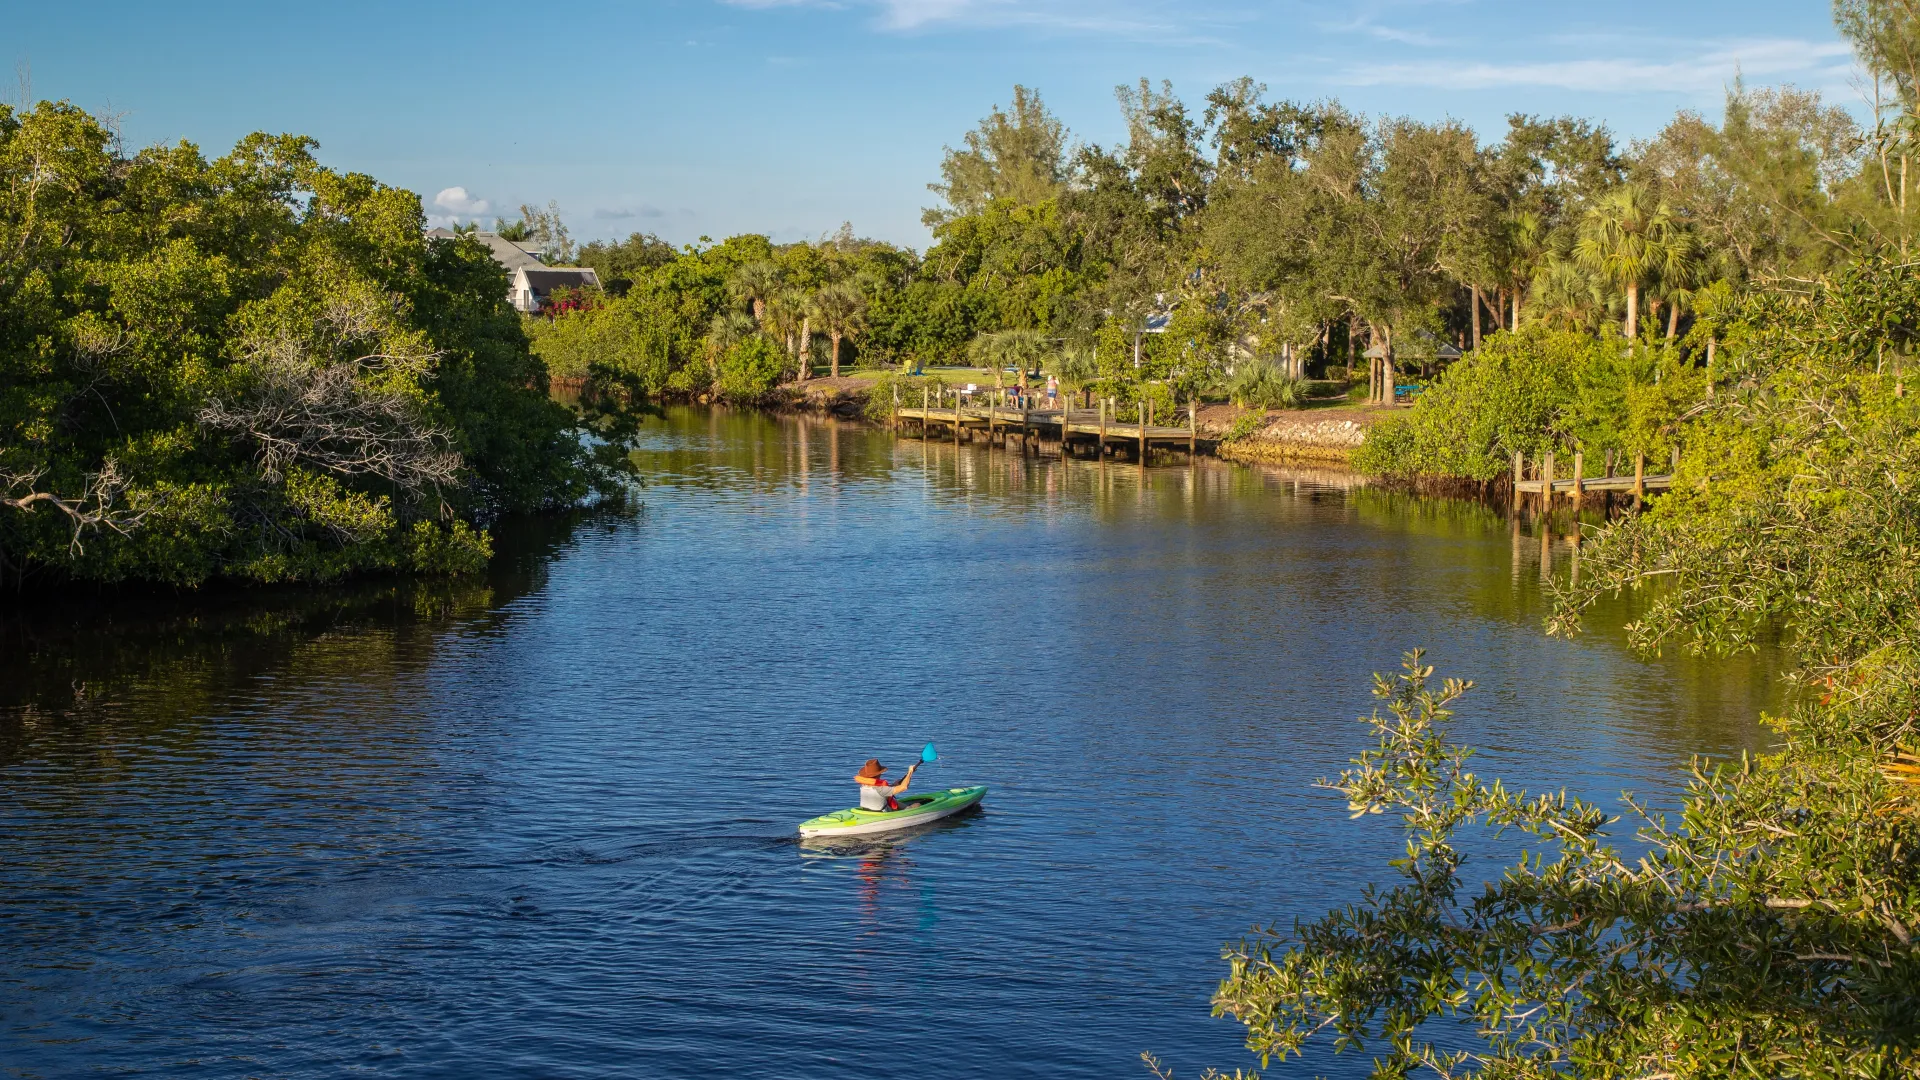 A resident paddling down the river exploring the serene Alafia River enveloped by sweeping trees on both shores.